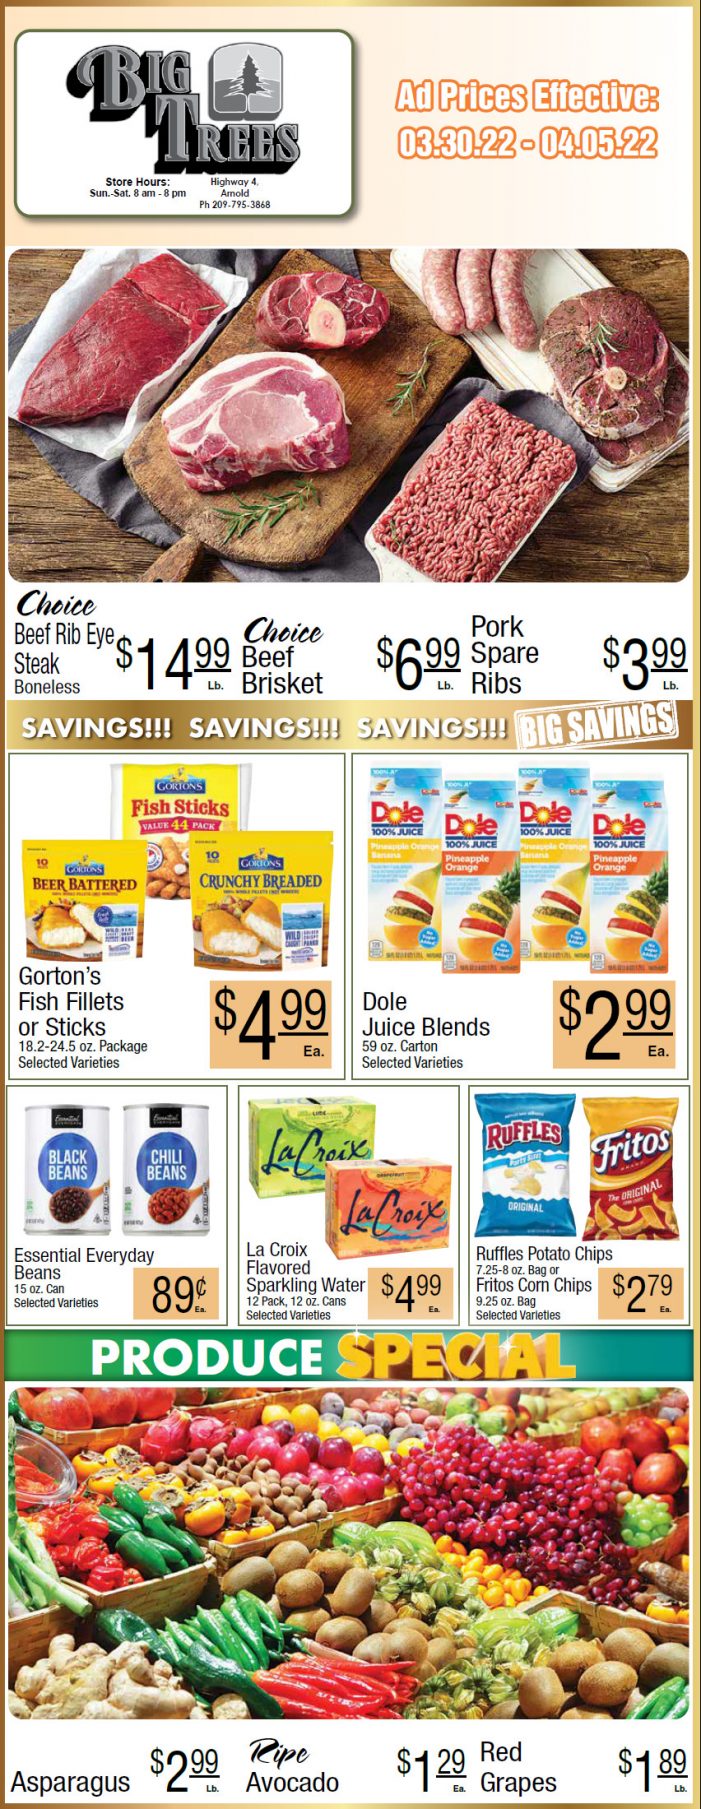 Big Trees Market Weekly Ad & Grocery Specials March 30th Through April 5th! Shop Local & Save!